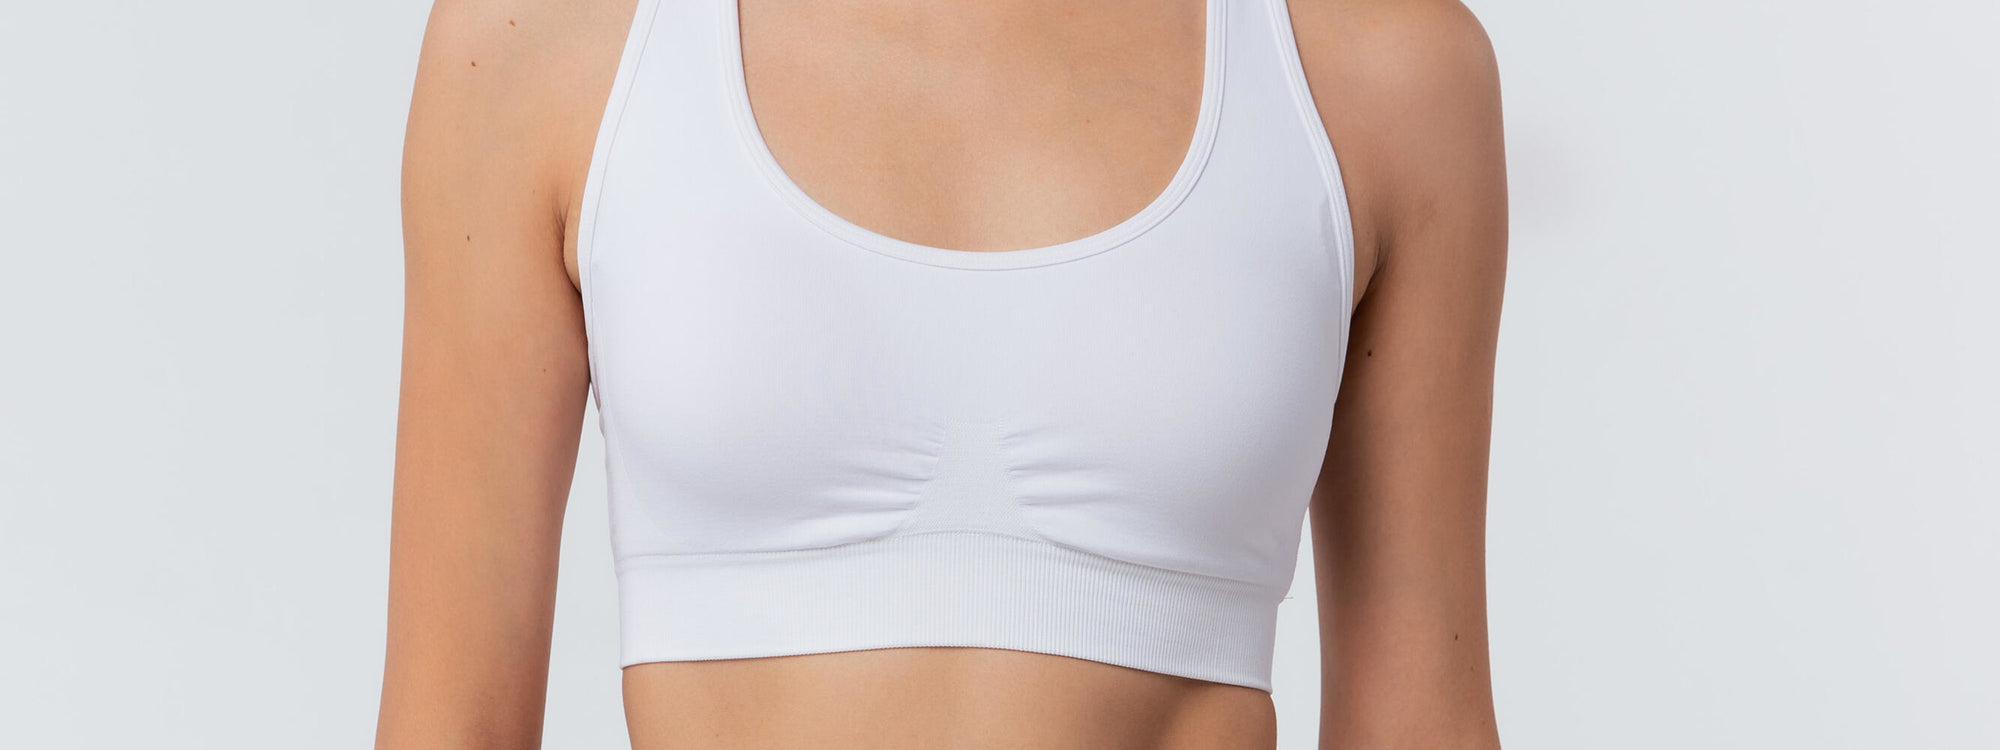 How to choose the right Sports Bra